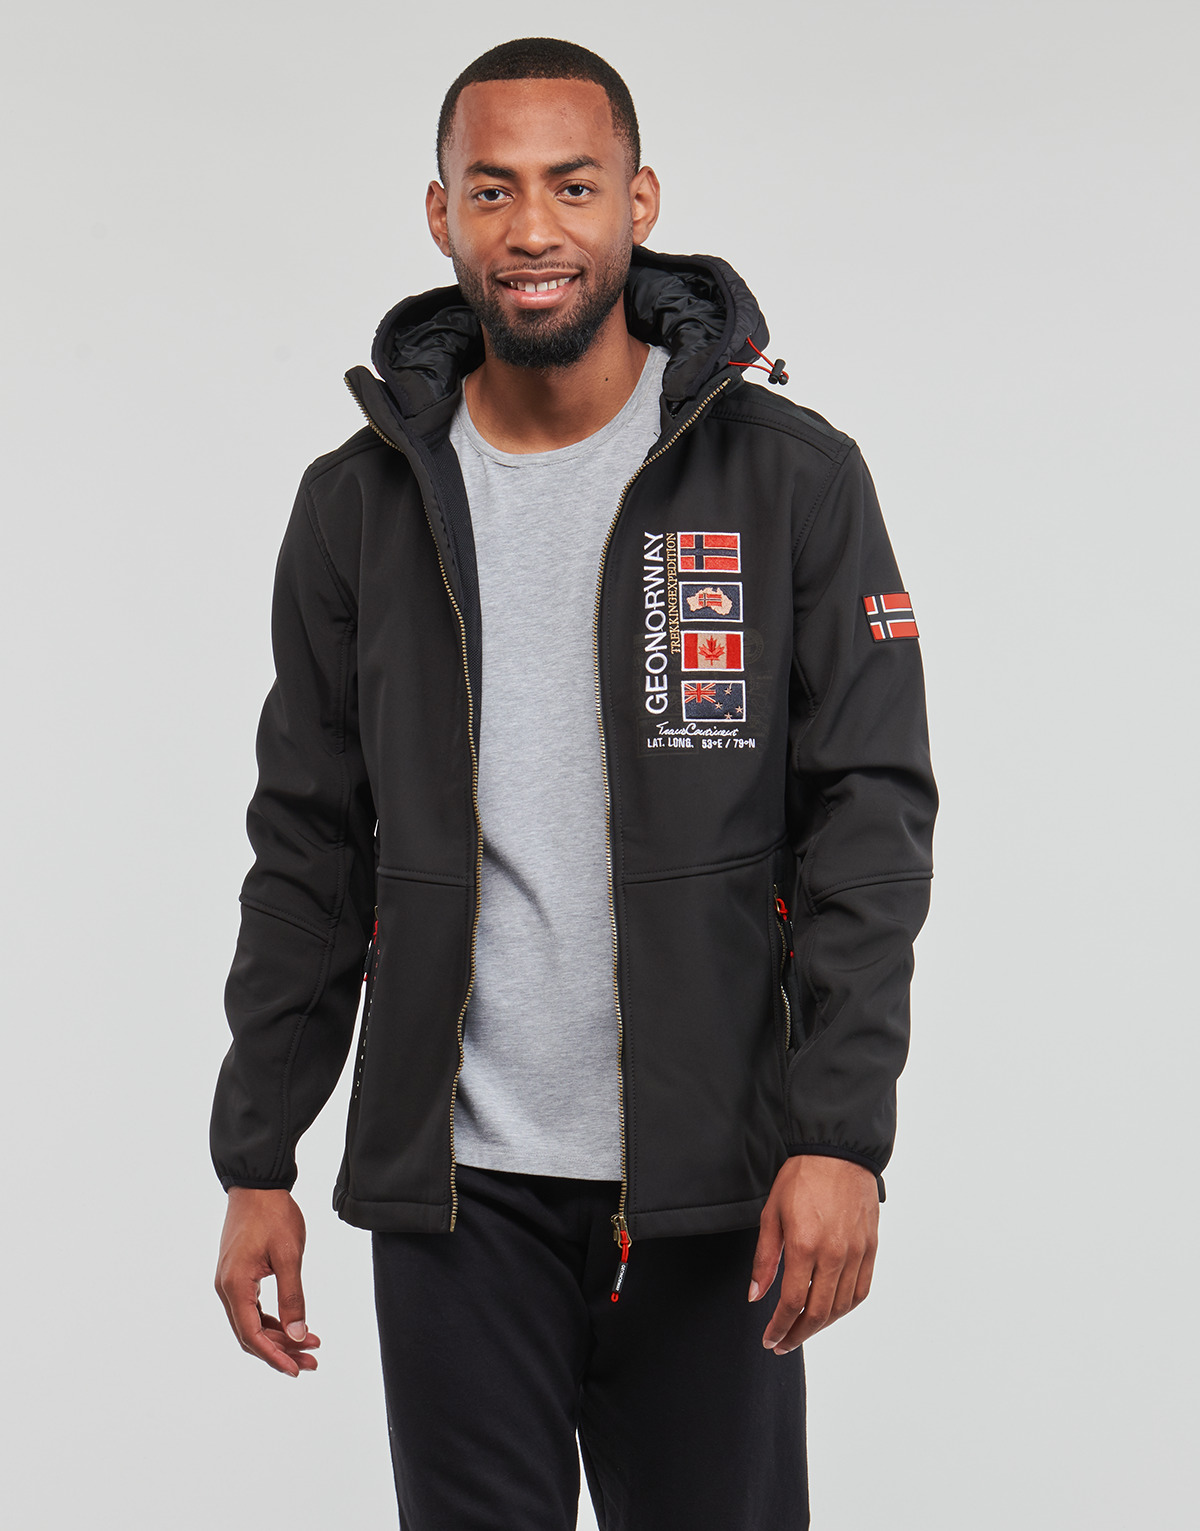 Geographical Norway Noir TALGARE aQ3O1E4H